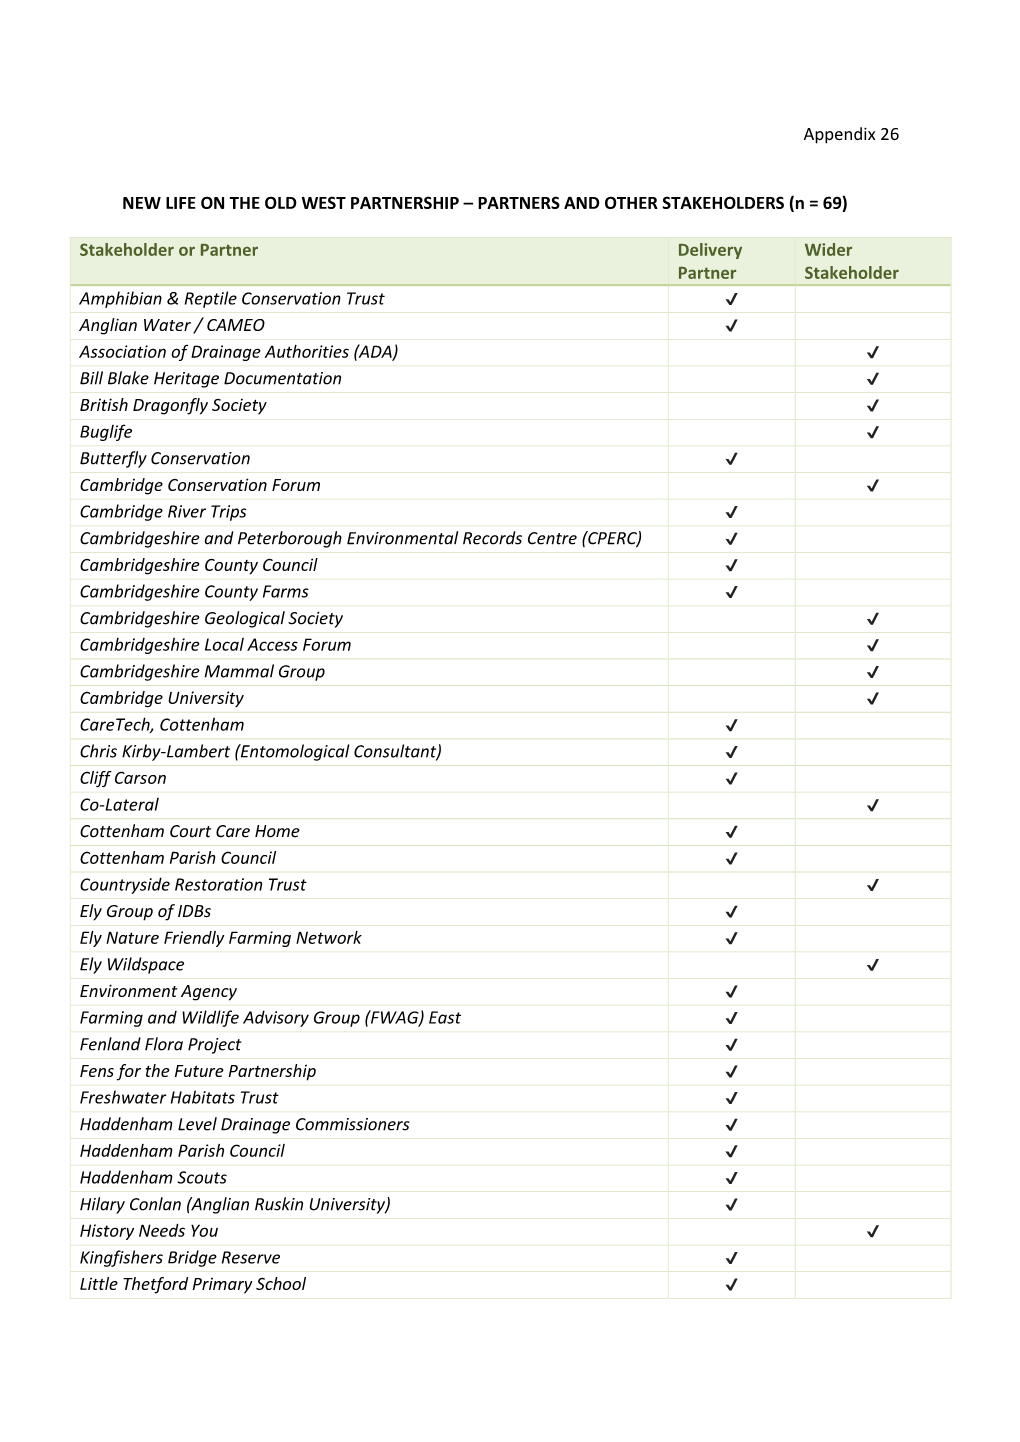 PARTNERS and OTHER STAKEHOLDERS (N = 69)